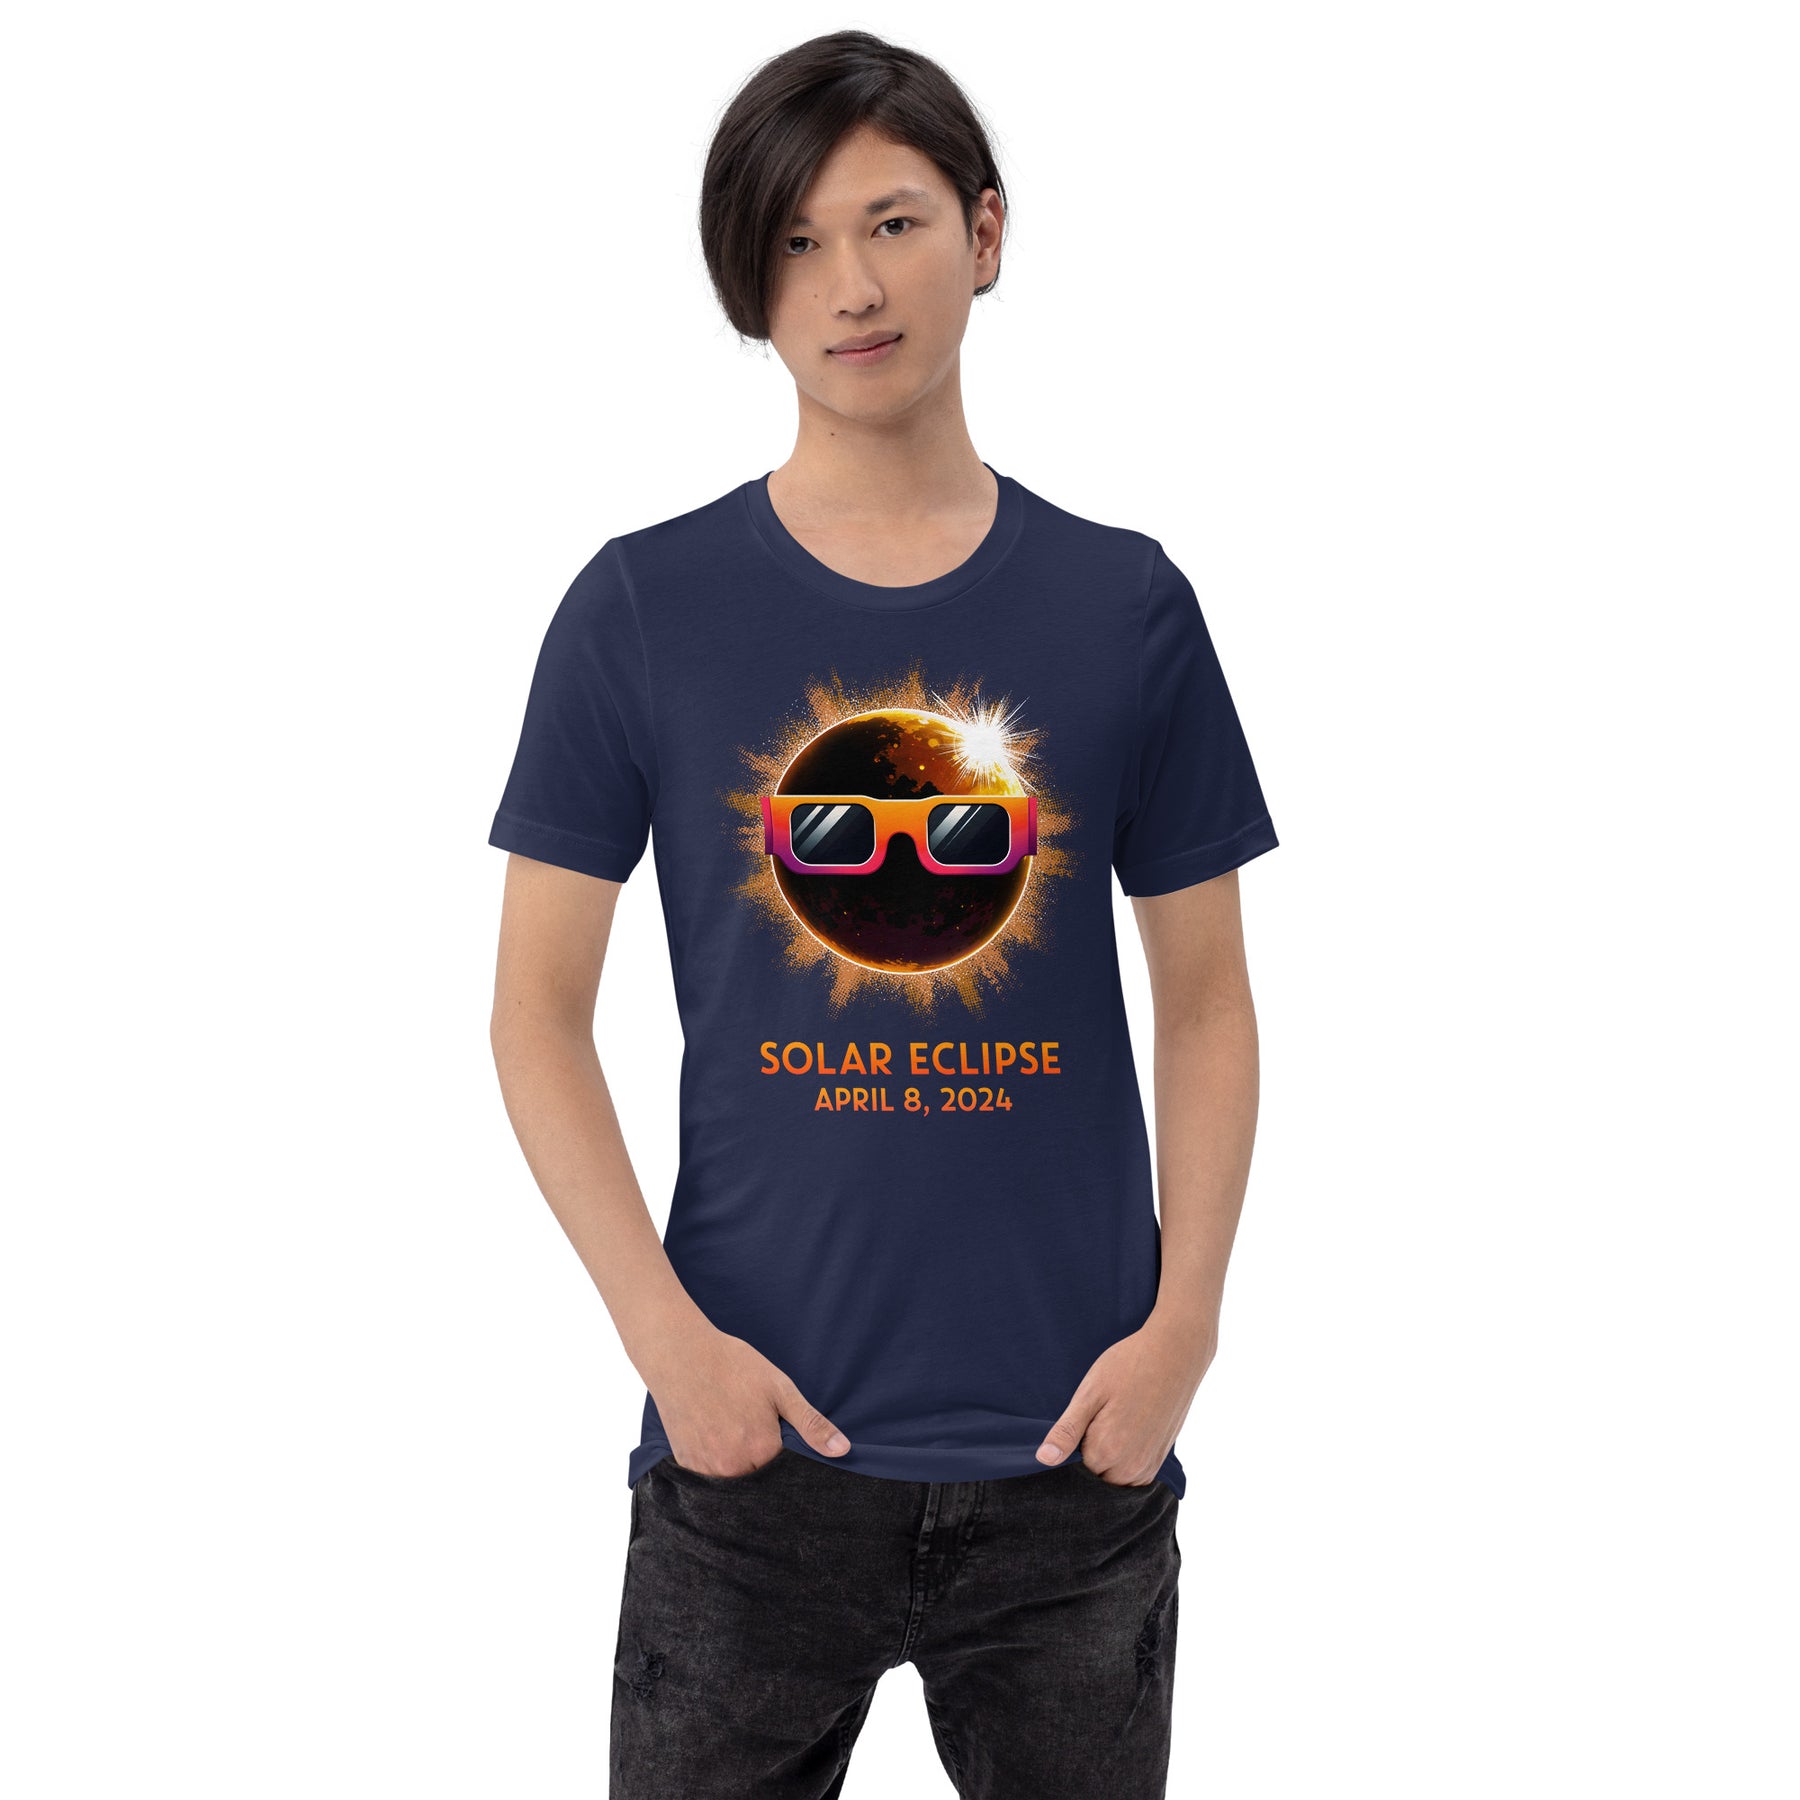 Total Solar Eclipse 2024 T-Shirt, Funny Totality Face Eclipse Watcher, Astronomy Moon Souvenir Gift – Eclipse Chaser Must-Have